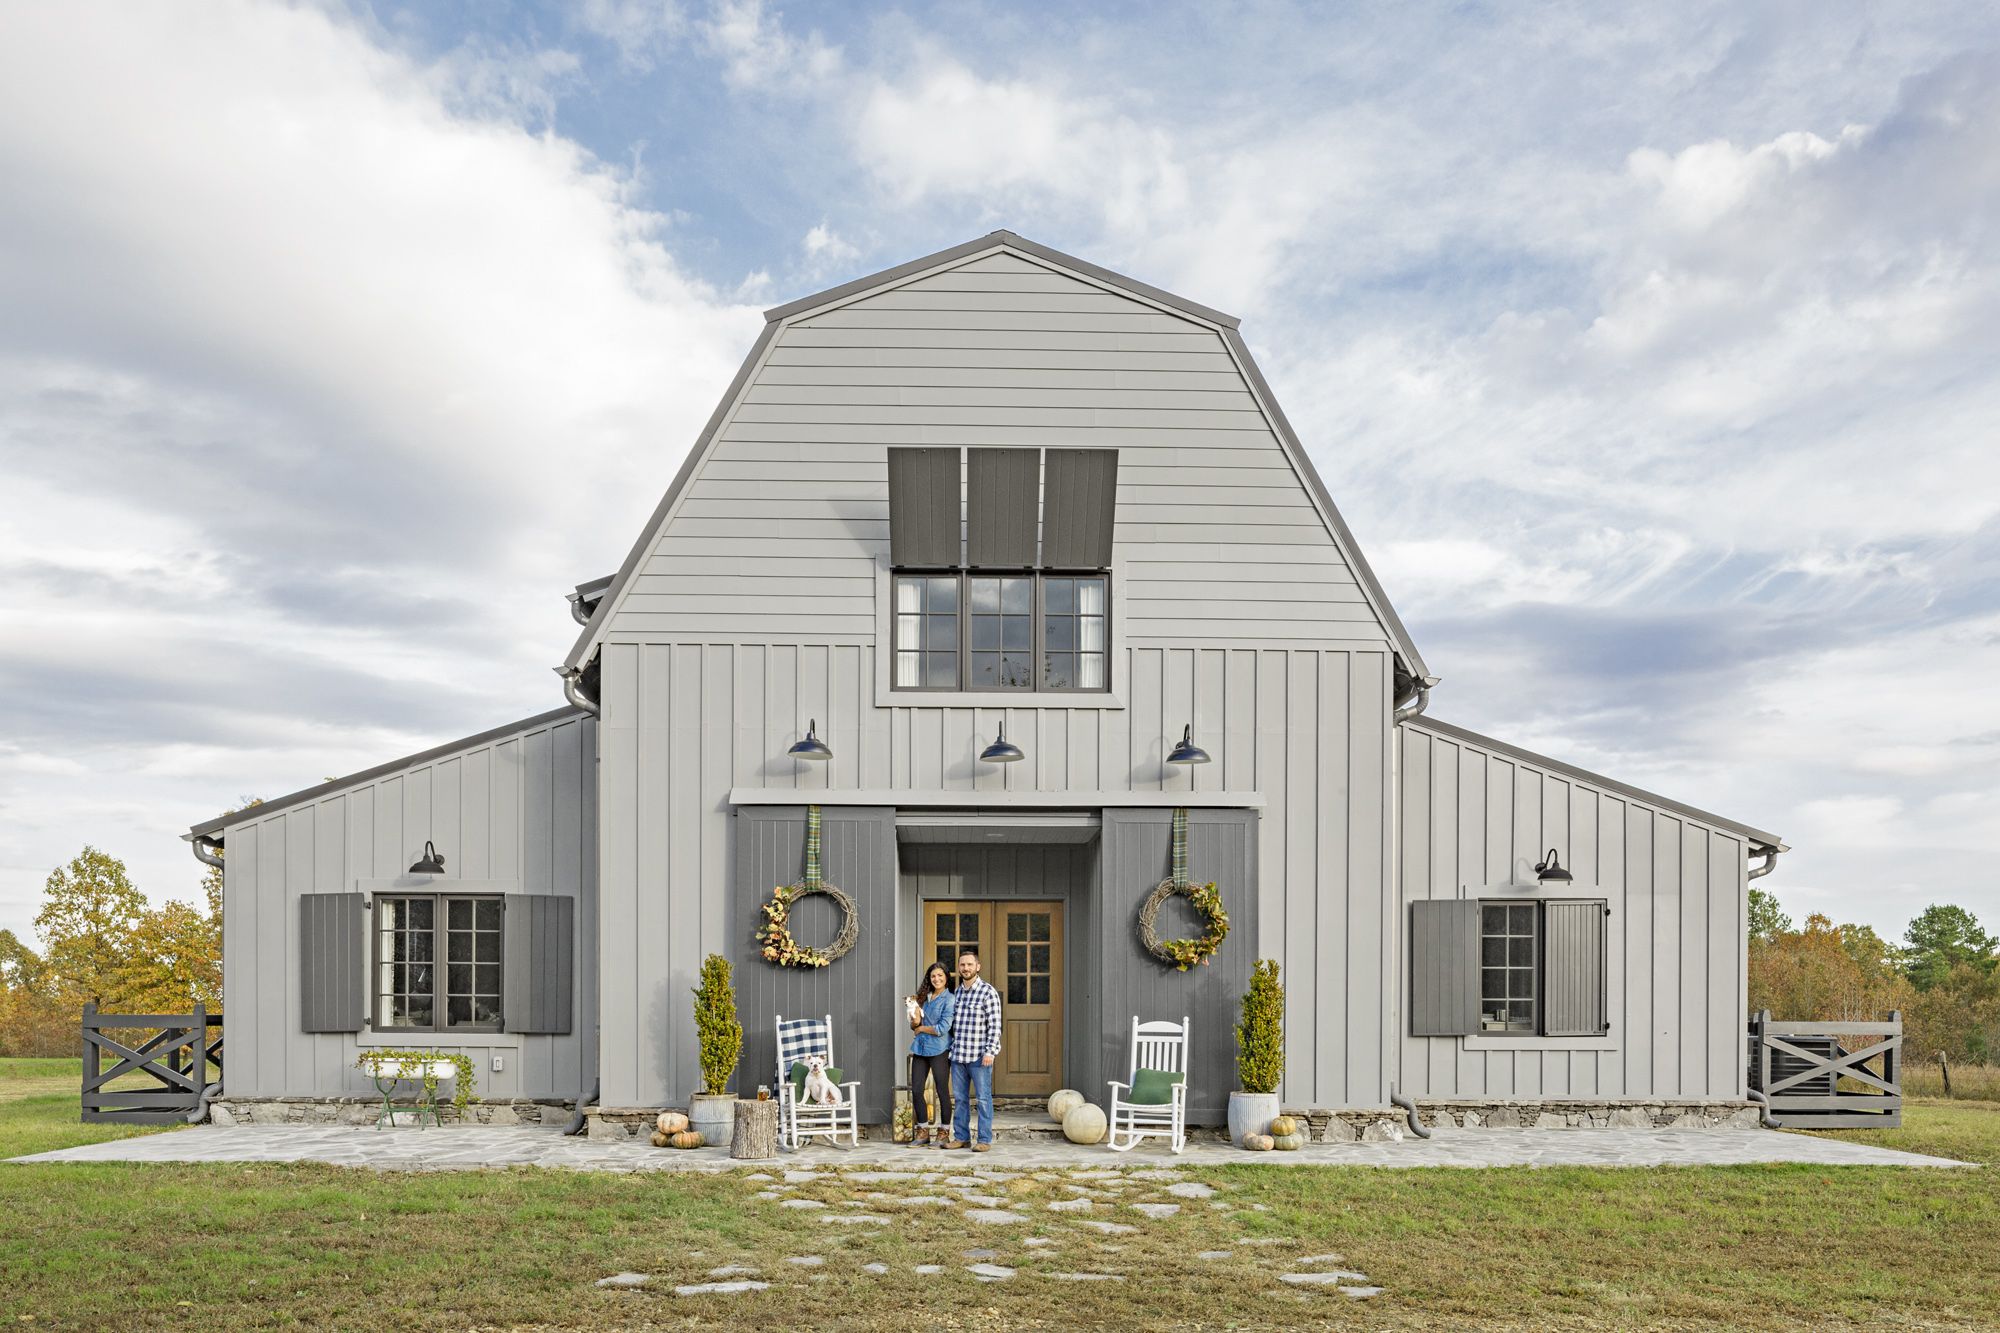 Picture of a barn with a man and a wife in front of it